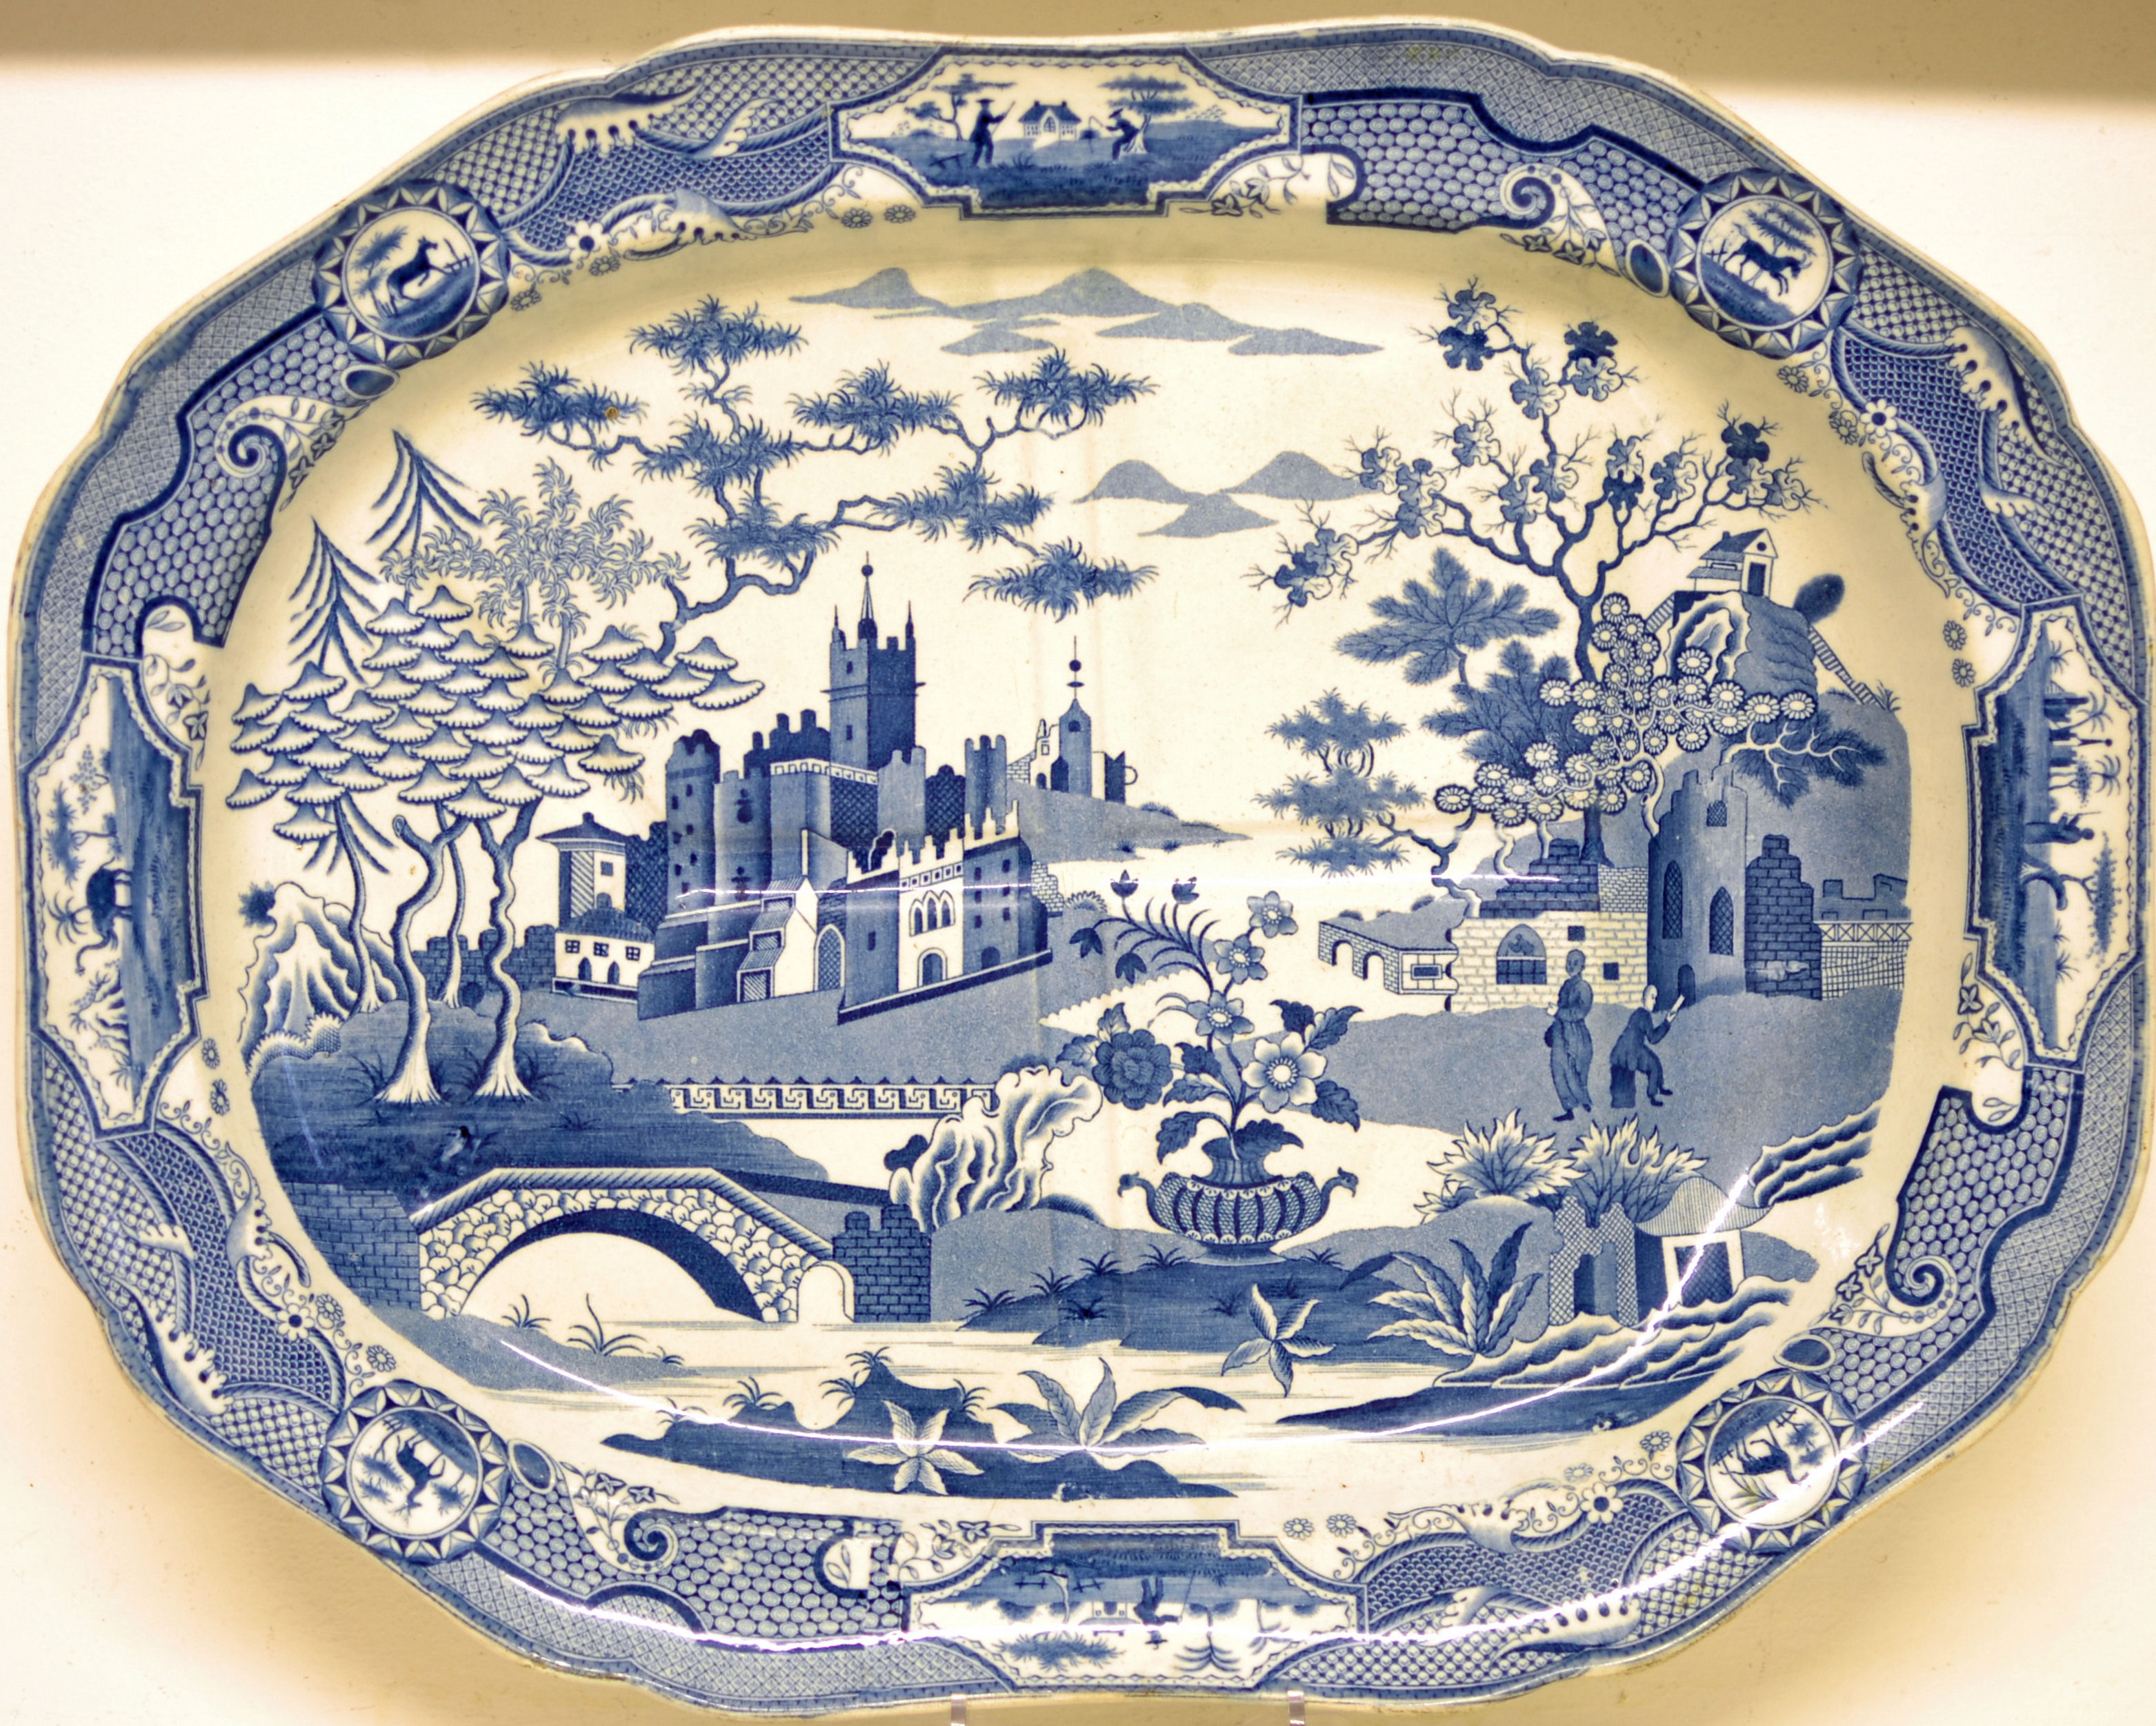 A 19th Century Earthenware Meat Plate with gravy well, printed in blue and white with an Oriental